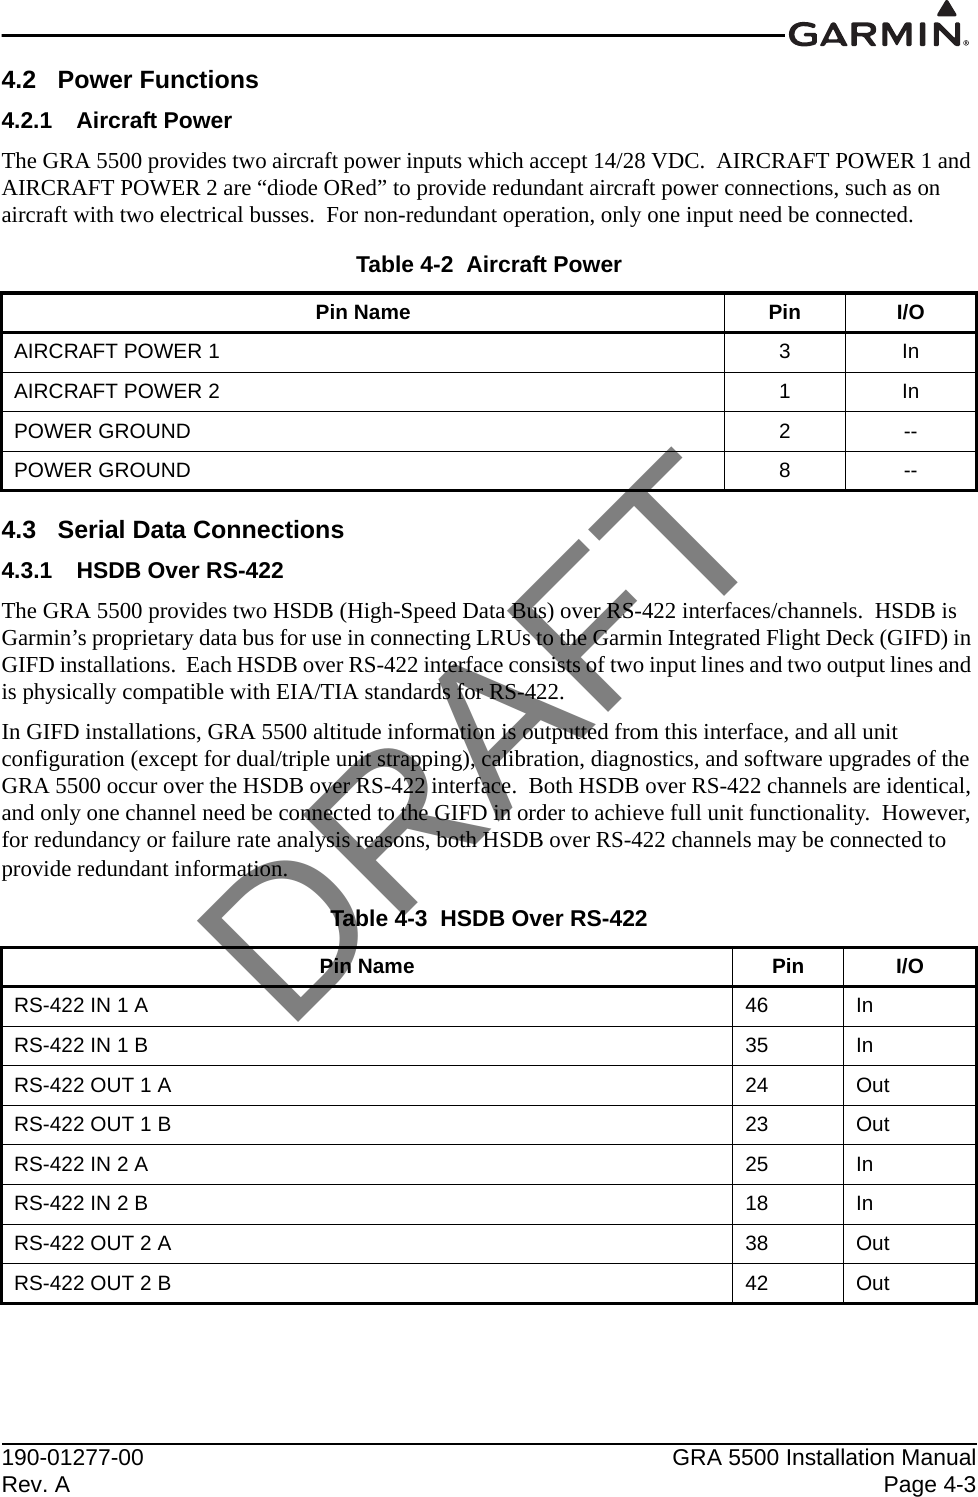 190-01277-00 GRA 5500 Installation ManualRev. A Page 4-34.2 Power Functions4.2.1 Aircraft PowerThe GRA 5500 provides two aircraft power inputs which accept 14/28 VDC.  AIRCRAFT POWER 1 and AIRCRAFT POWER 2 are “diode ORed” to provide redundant aircraft power connections, such as on aircraft with two electrical busses.  For non-redundant operation, only one input need be connected.4.3 Serial Data Connections4.3.1 HSDB Over RS-422The GRA 5500 provides two HSDB (High-Speed Data Bus) over RS-422 interfaces/channels.  HSDB is Garmin’s proprietary data bus for use in connecting LRUs to the Garmin Integrated Flight Deck (GIFD) in GIFD installations.  Each HSDB over RS-422 interface consists of two input lines and two output lines and is physically compatible with EIA/TIA standards for RS-422.In GIFD installations, GRA 5500 altitude information is outputted from this interface, and all unit configuration (except for dual/triple unit strapping), calibration, diagnostics, and software upgrades of the GRA 5500 occur over the HSDB over RS-422 interface.  Both HSDB over RS-422 channels are identical, and only one channel need be connected to the GIFD in order to achieve full unit functionality.  However, for redundancy or failure rate analysis reasons, both HSDB over RS-422 channels may be connected to provide redundant information.Table 4-2  Aircraft PowerPin Name Pin I/OAIRCRAFT POWER 1  3InAIRCRAFT POWER 2 1InPOWER GROUND 2--POWER GROUND 8--Table 4-3  HSDB Over RS-422Pin Name Pin I/ORS-422 IN 1 A 46 InRS-422 IN 1 B 35 InRS-422 OUT 1 A 24 OutRS-422 OUT 1 B 23 OutRS-422 IN 2 A 25 InRS-422 IN 2 B 18 InRS-422 OUT 2 A 38 OutRS-422 OUT 2 B 42 OutDRAFT